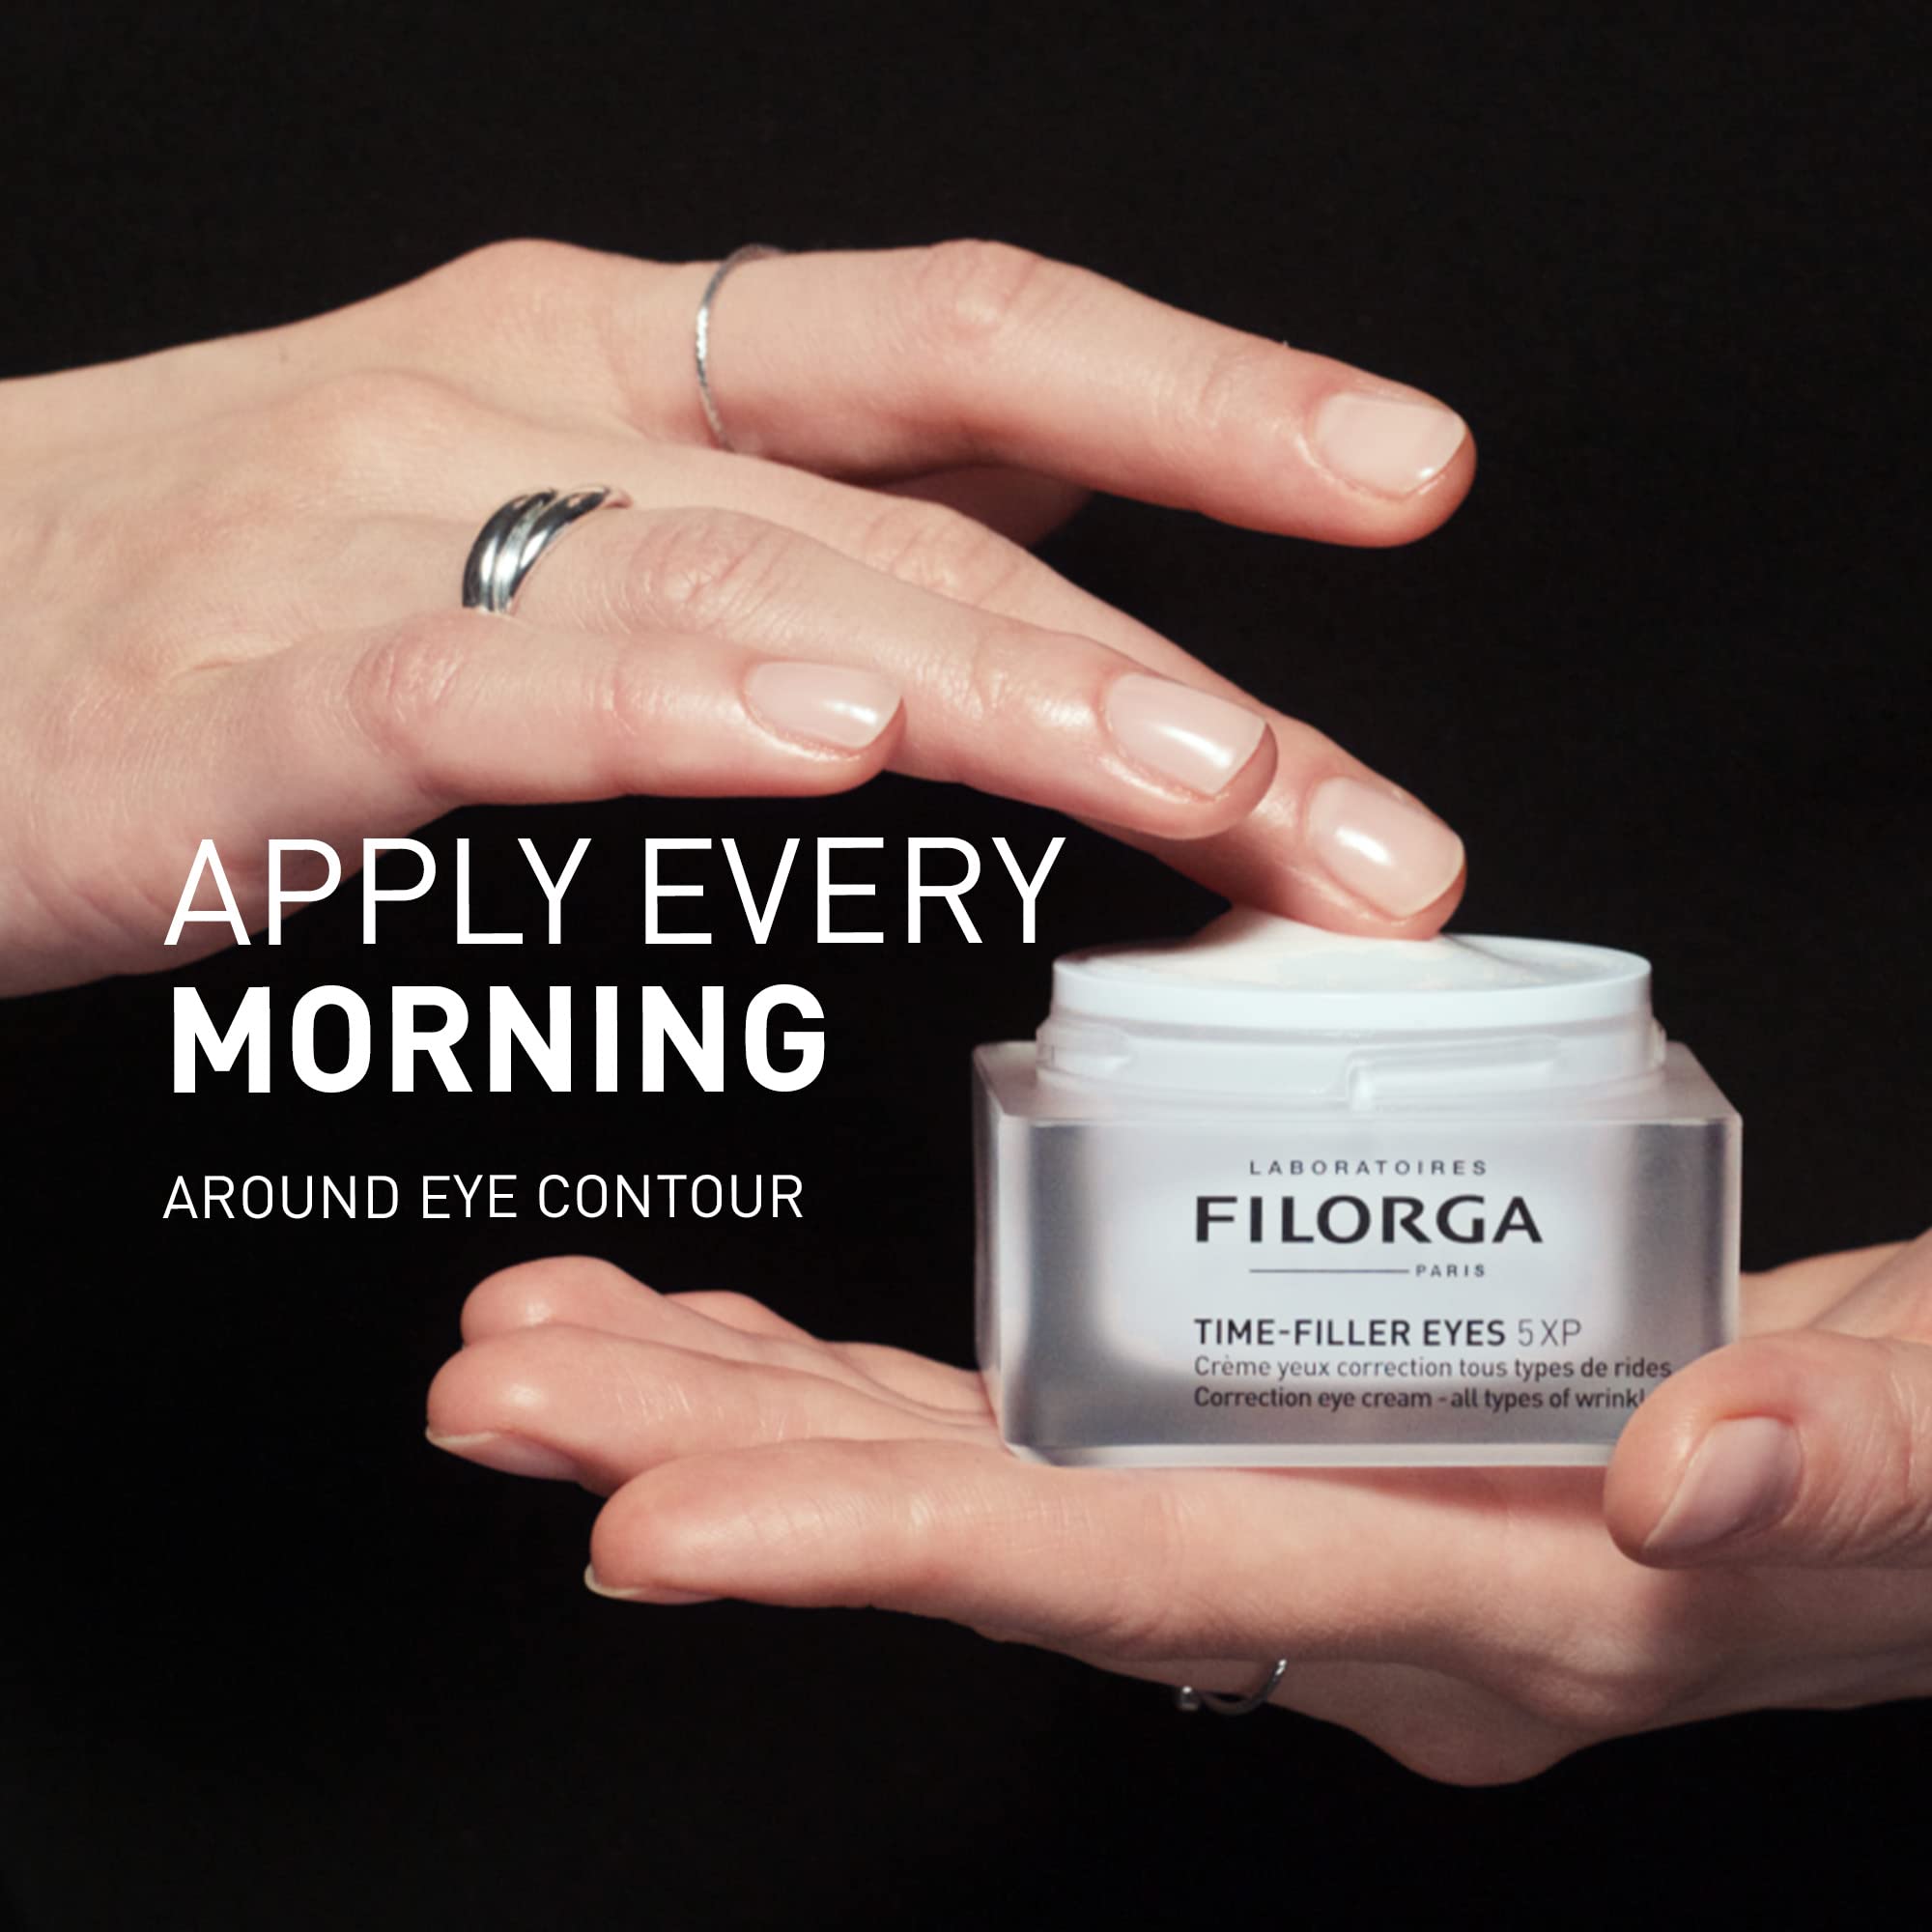 Filorga Time-Filler Eyes Daily Anti Aging and Wrinkle Reducing Eye Cream With Hyaluronic Acid to Minimize Wrinkles and Dark Circles, Lift Eyelids, and Enhance Lashes